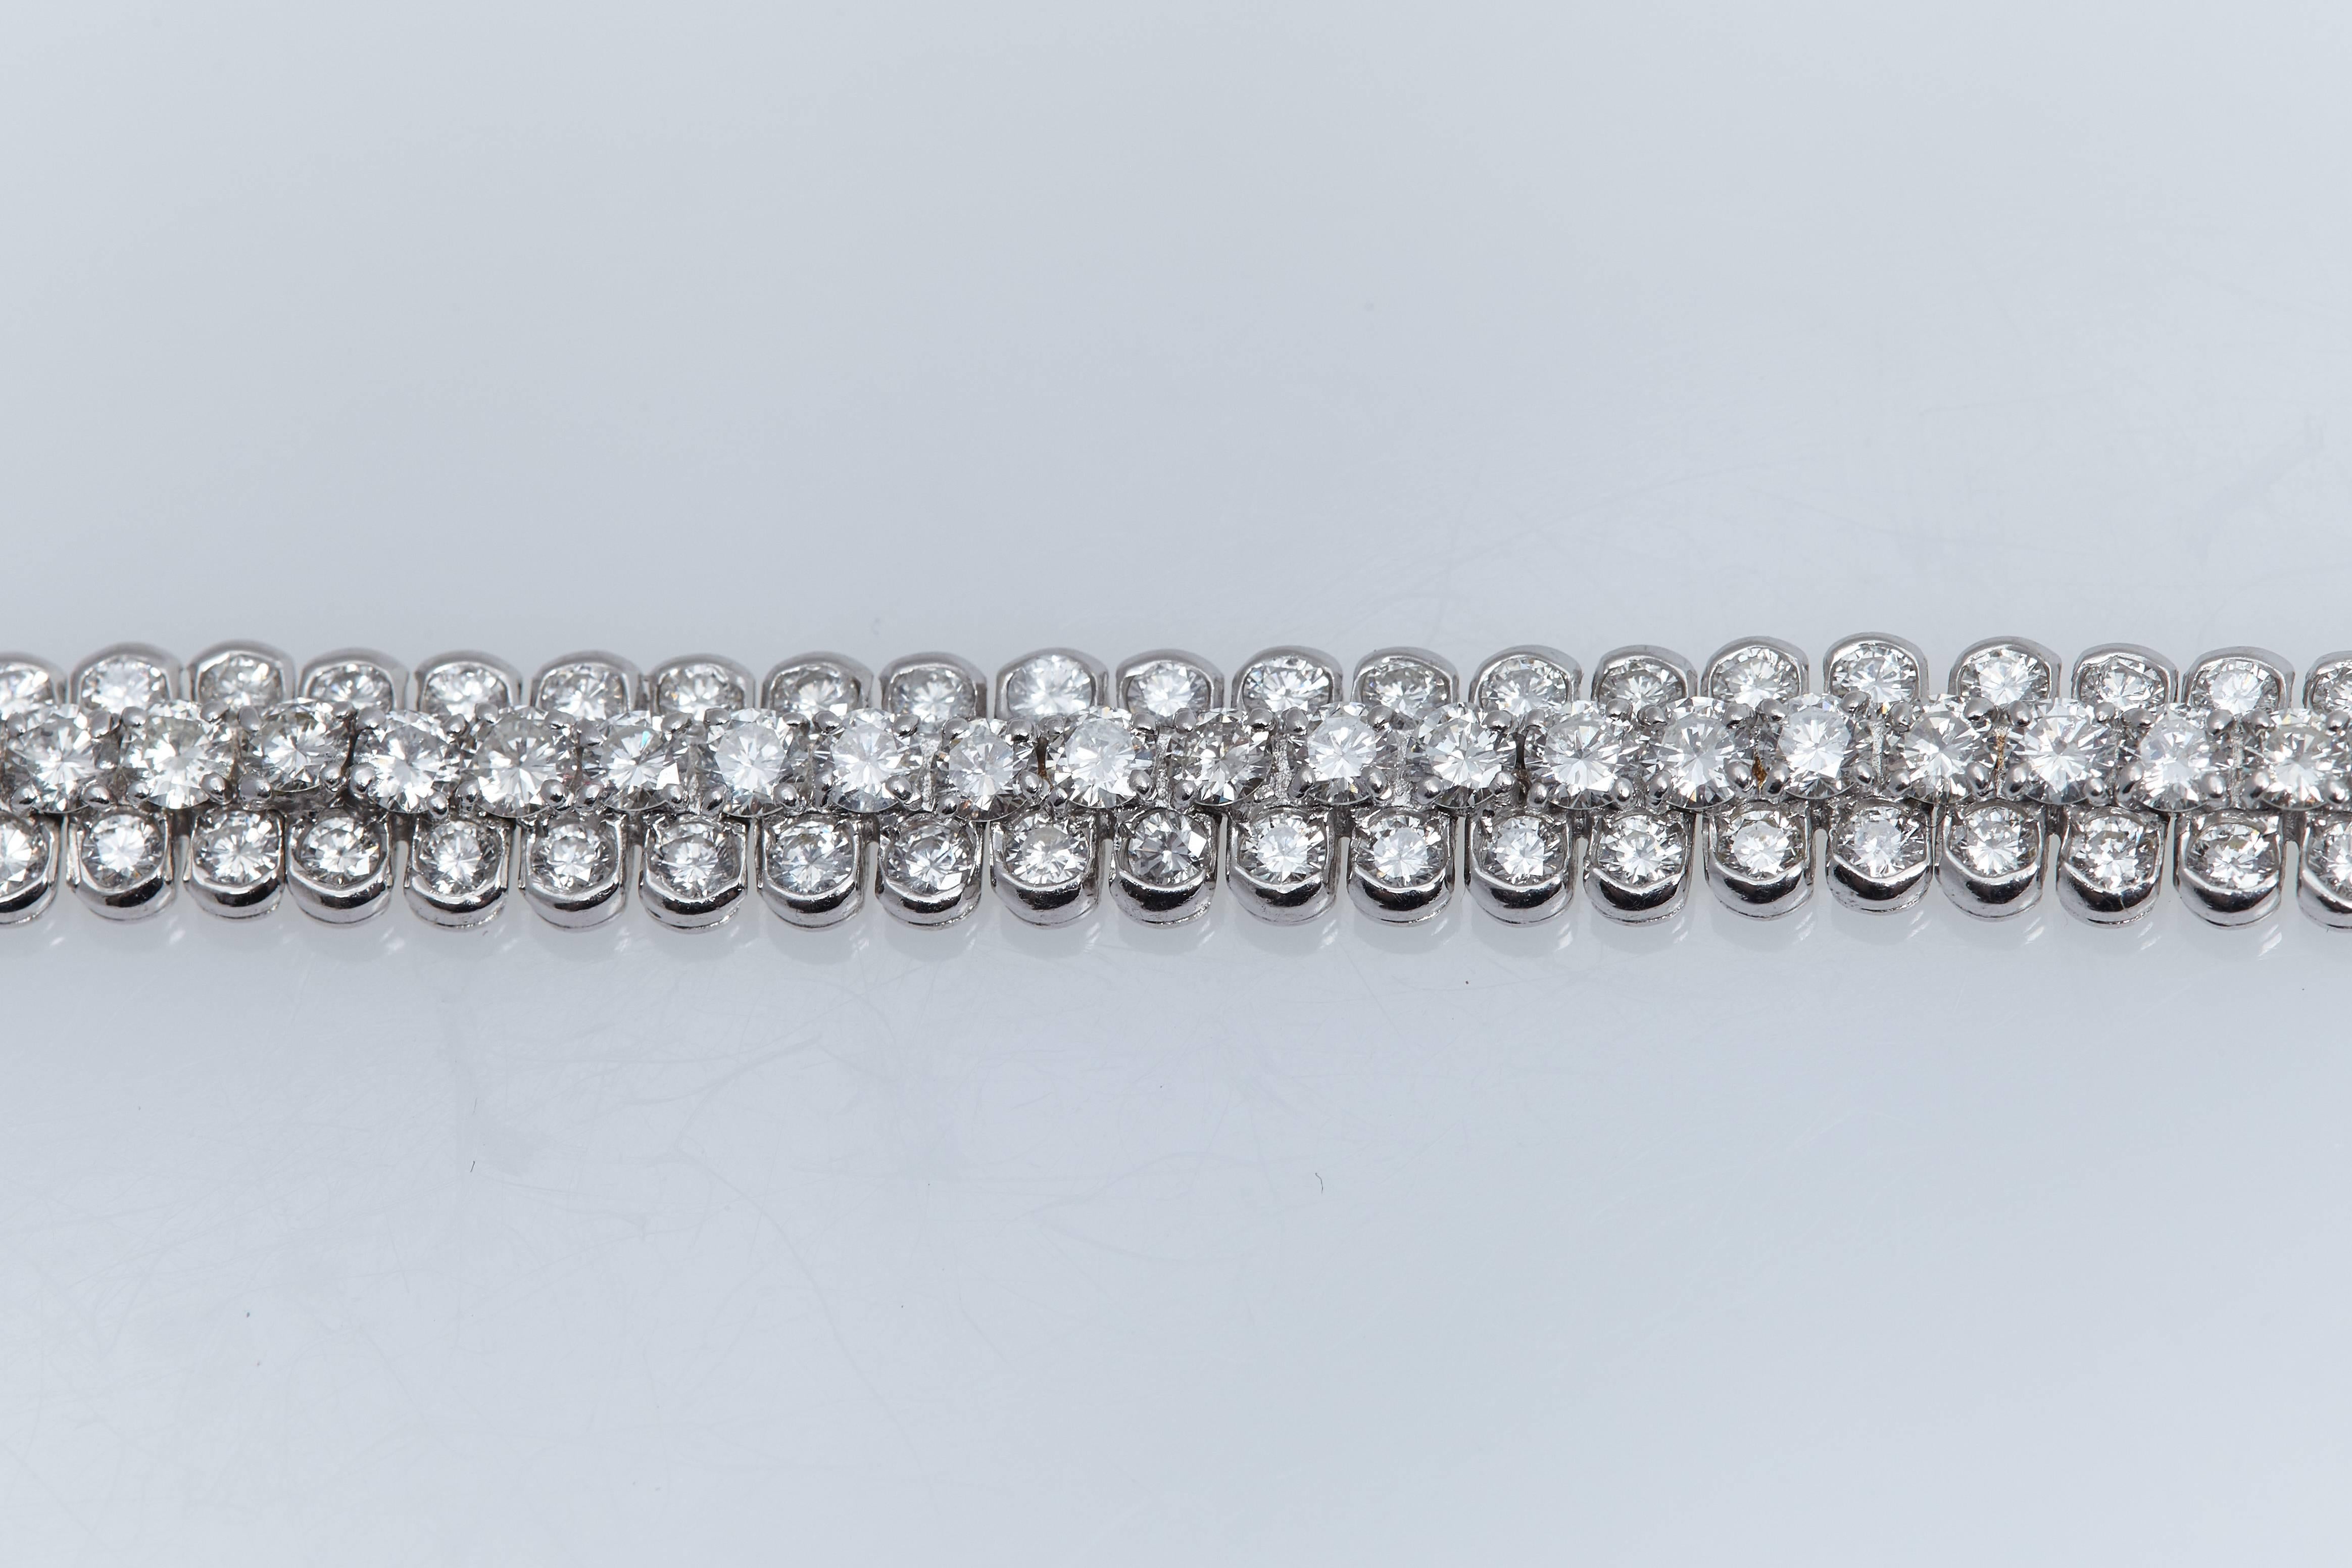 Van Cleef & Arpels diamond and eighteen karat white gold flexible bracelet.  The bracelet has 3 rows with the middle row being slightly raised above the two outside rows.  It is made up of 162 round diamonds and weighs approximately 9.50 carats.